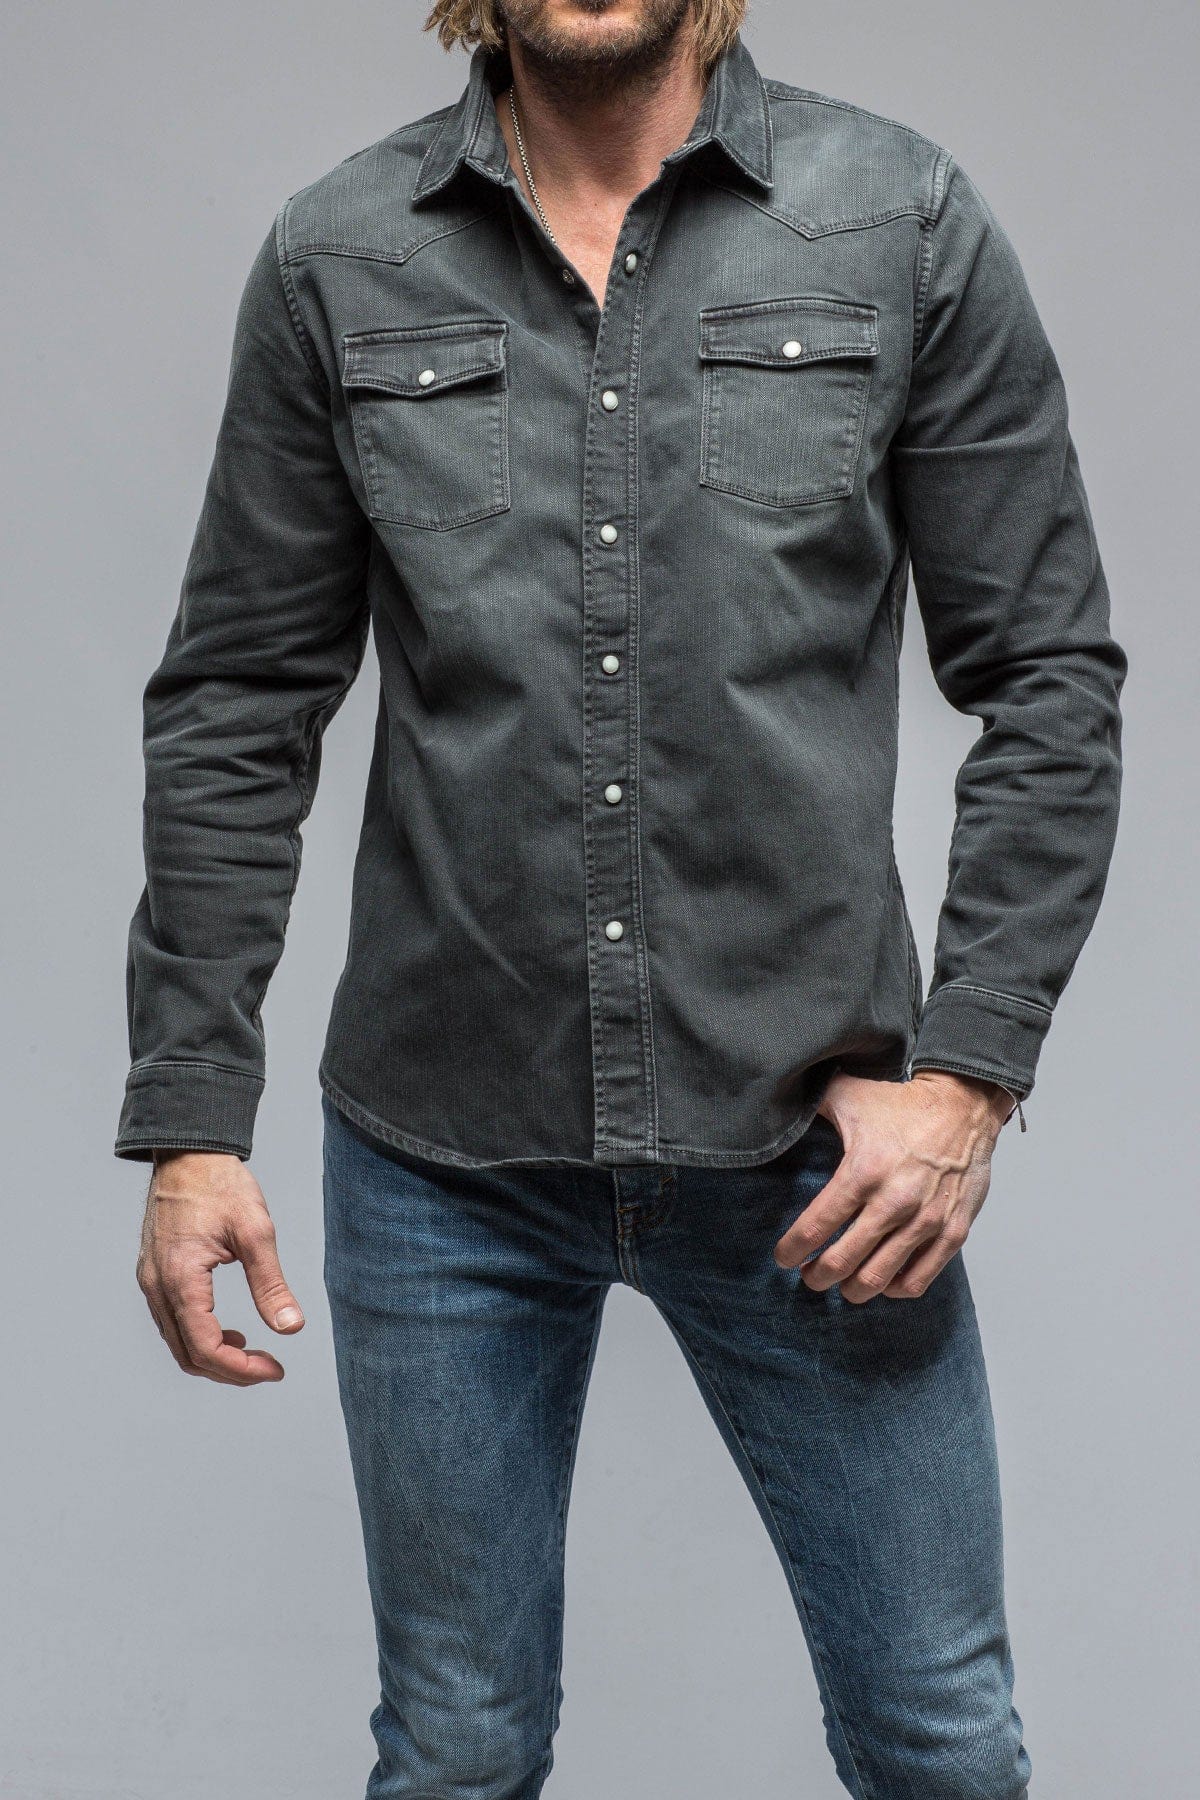 Ranger Colored Denim Snap Shirt In Anthracite - AXEL'S